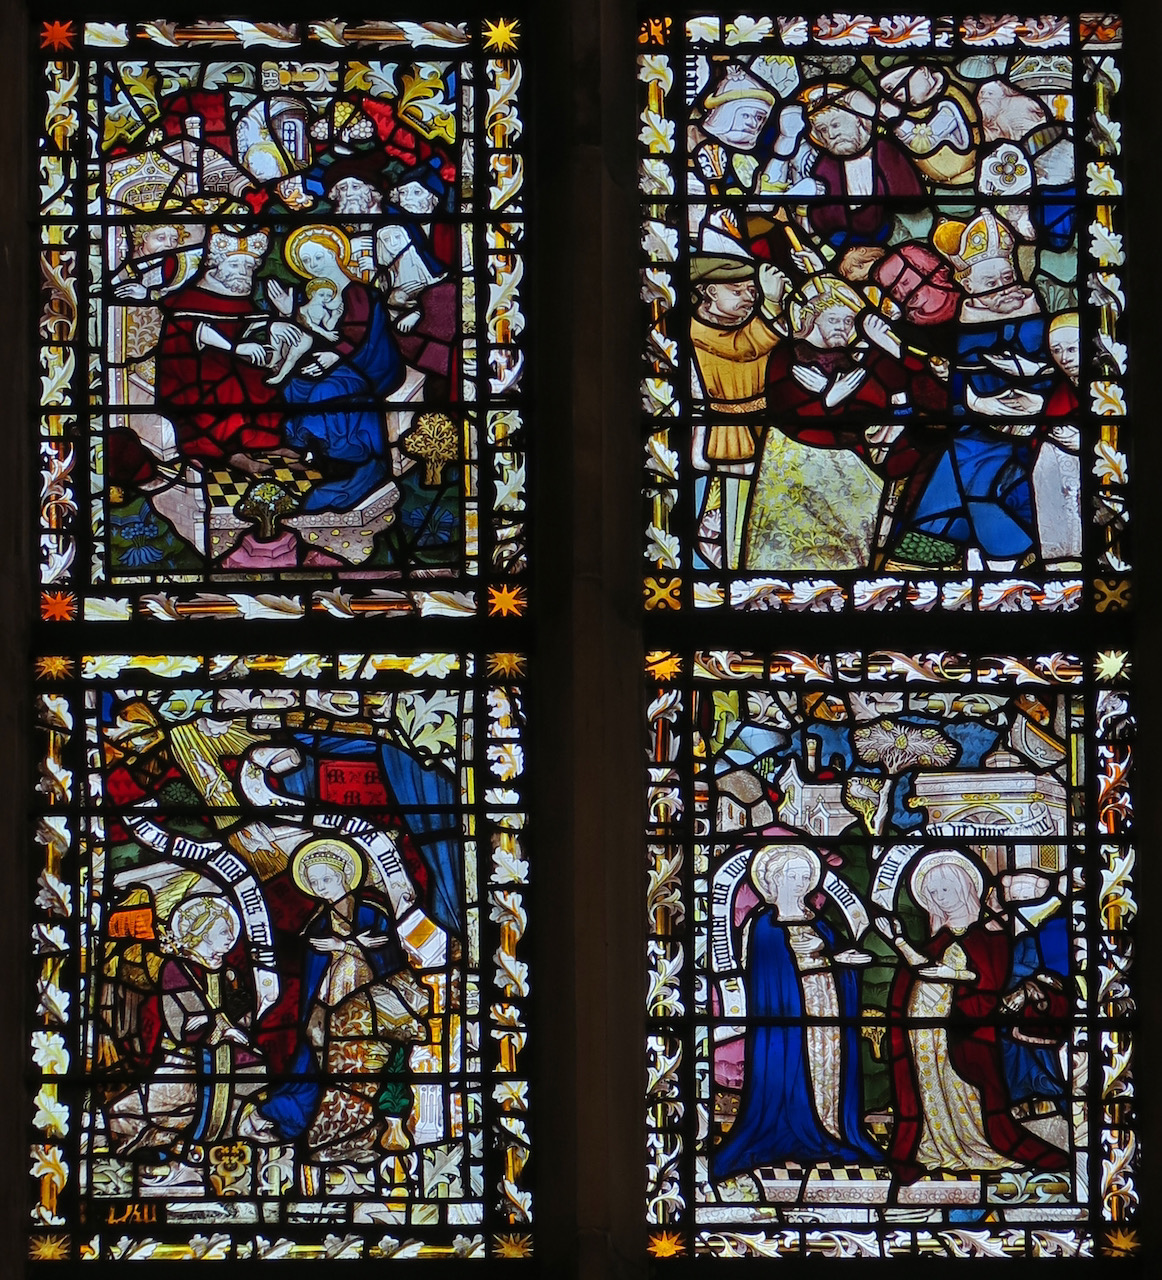 Chancel window (15th/16th c.), detail showing (from top left to bottom right) Jesus’s circumcision, Jesus’s flagellation, the annunciation, Mary visiting Elizabeth